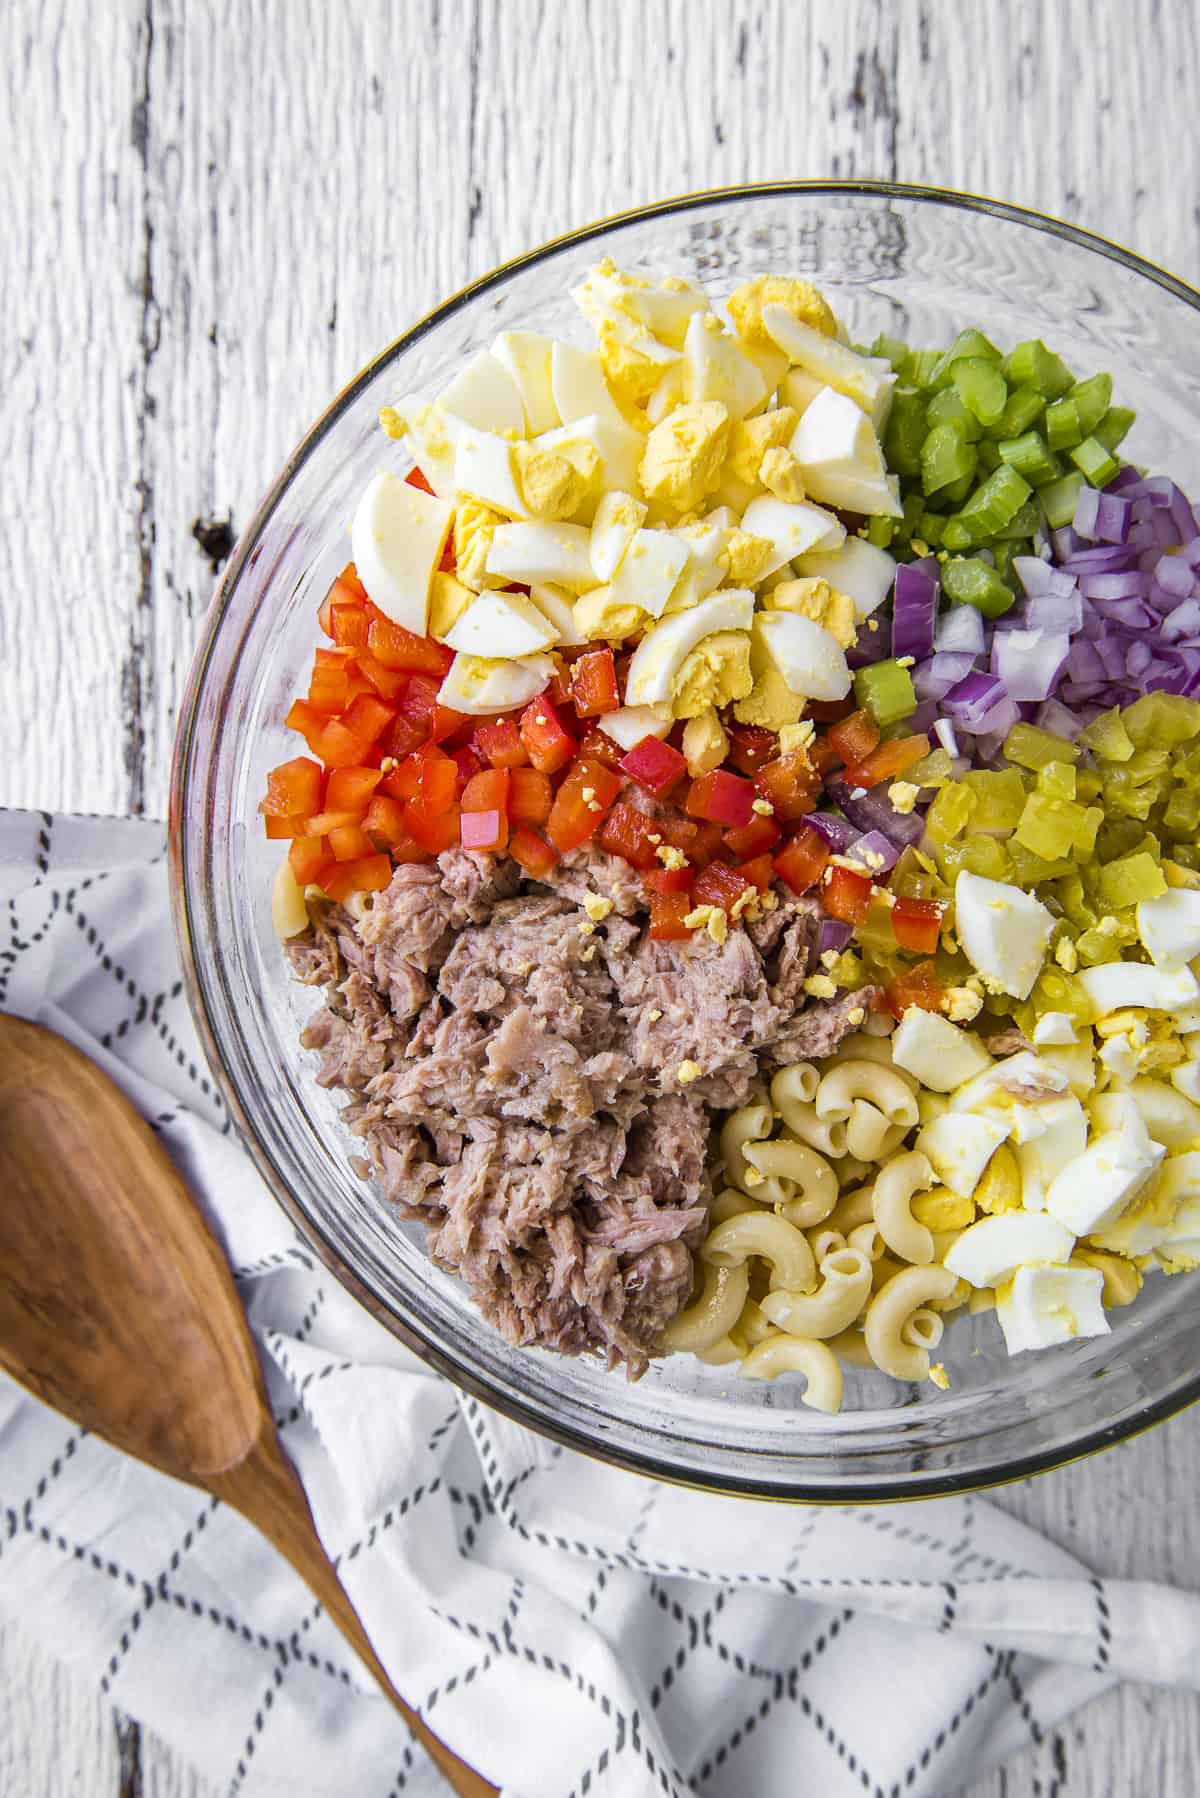 Ingredients for Tuna Macaroni Salad in a glass bowl